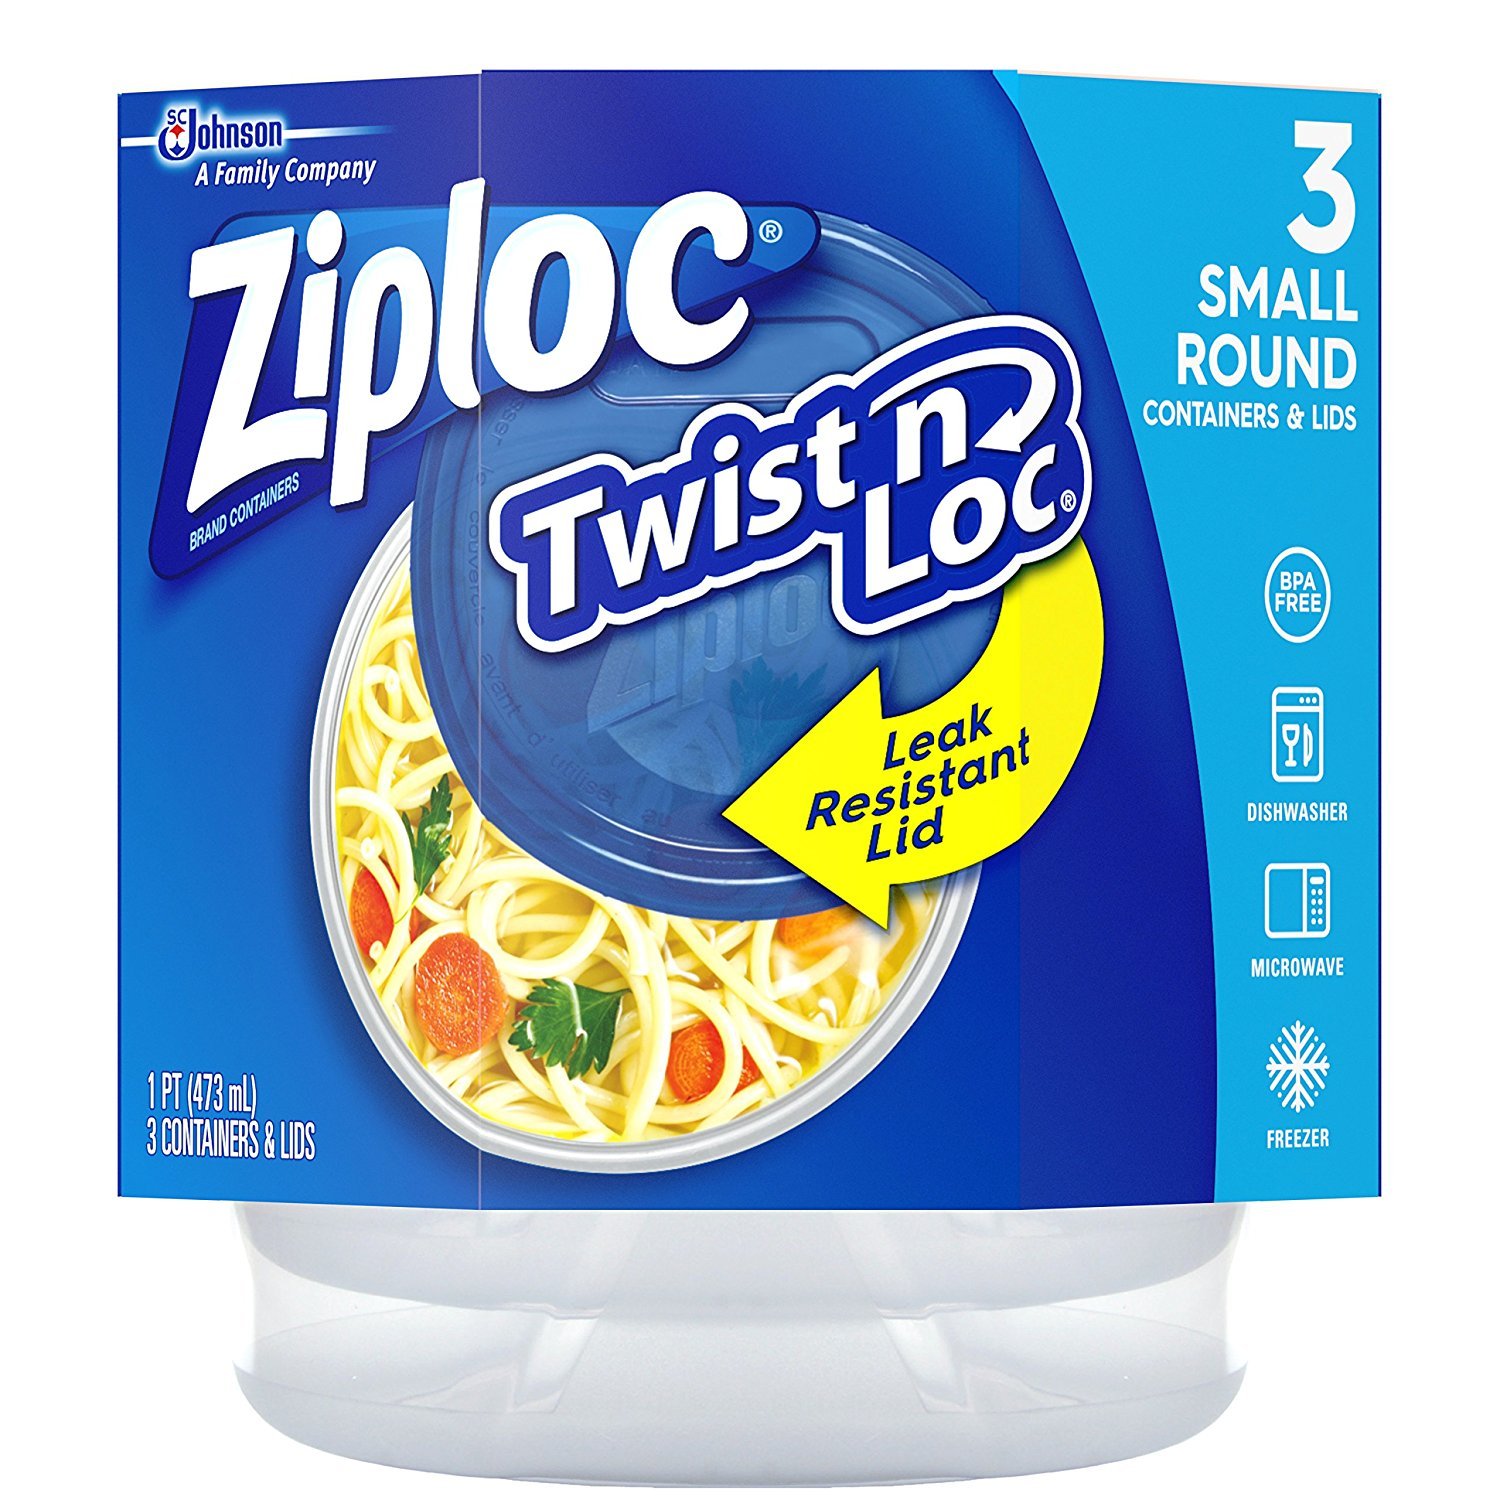 Ziploc® Twist 'n Loc® Small Round Food Storage Containers with Lids, Set of 3 - image 1 of 10